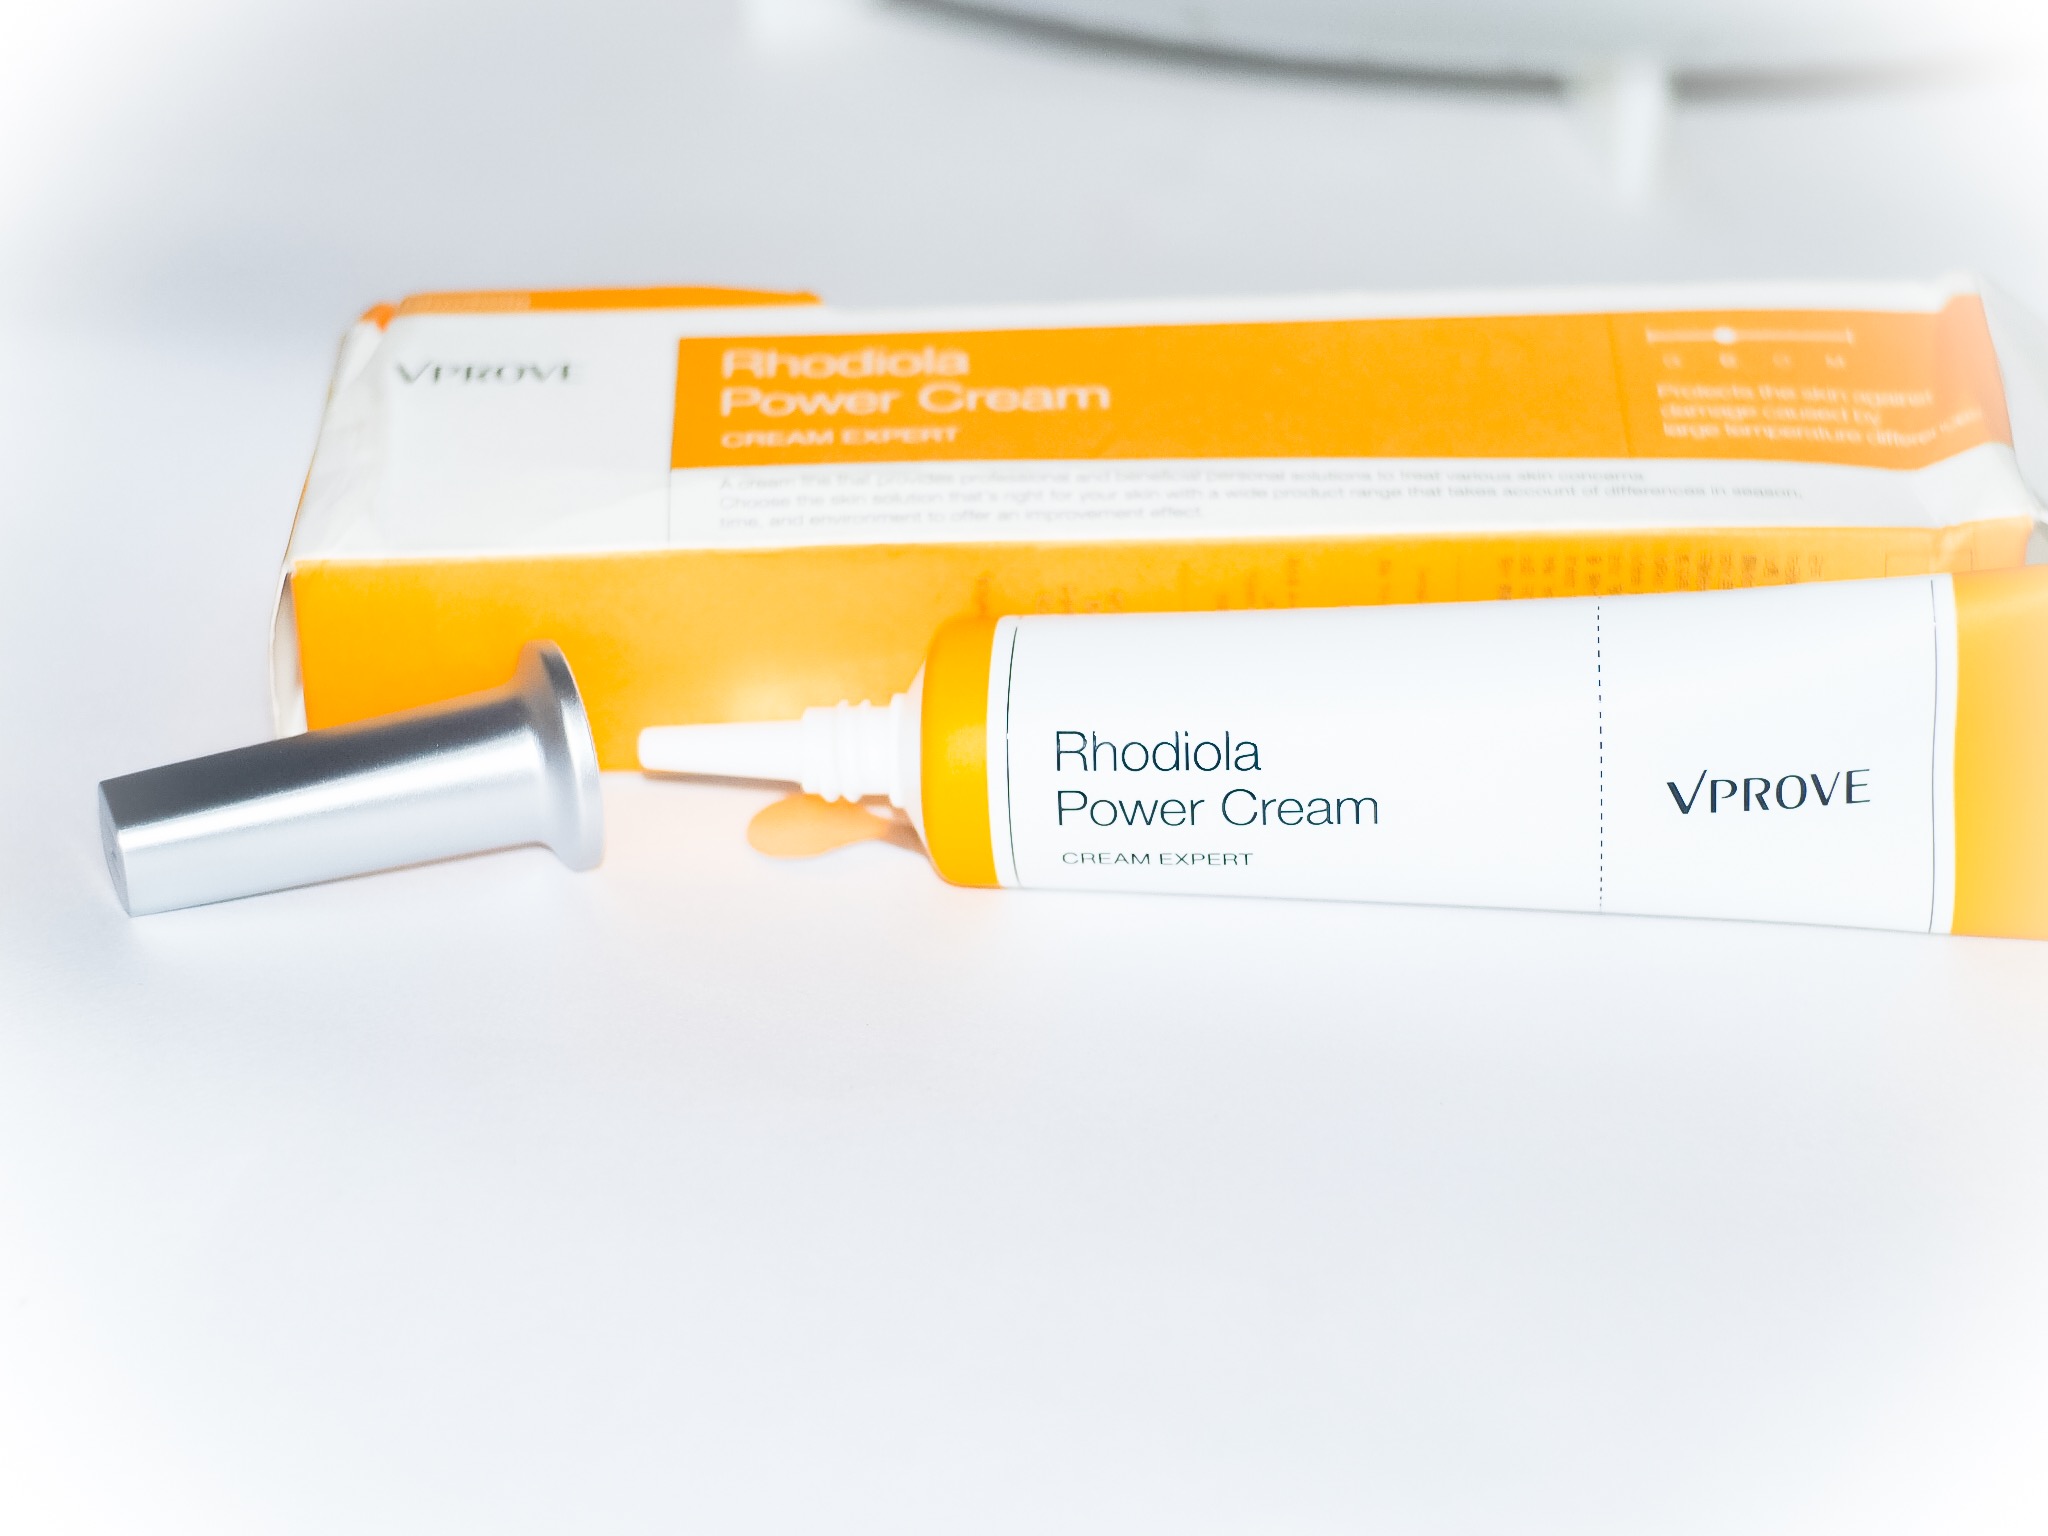 VPROVE Rhodiola Power Cream Review Post